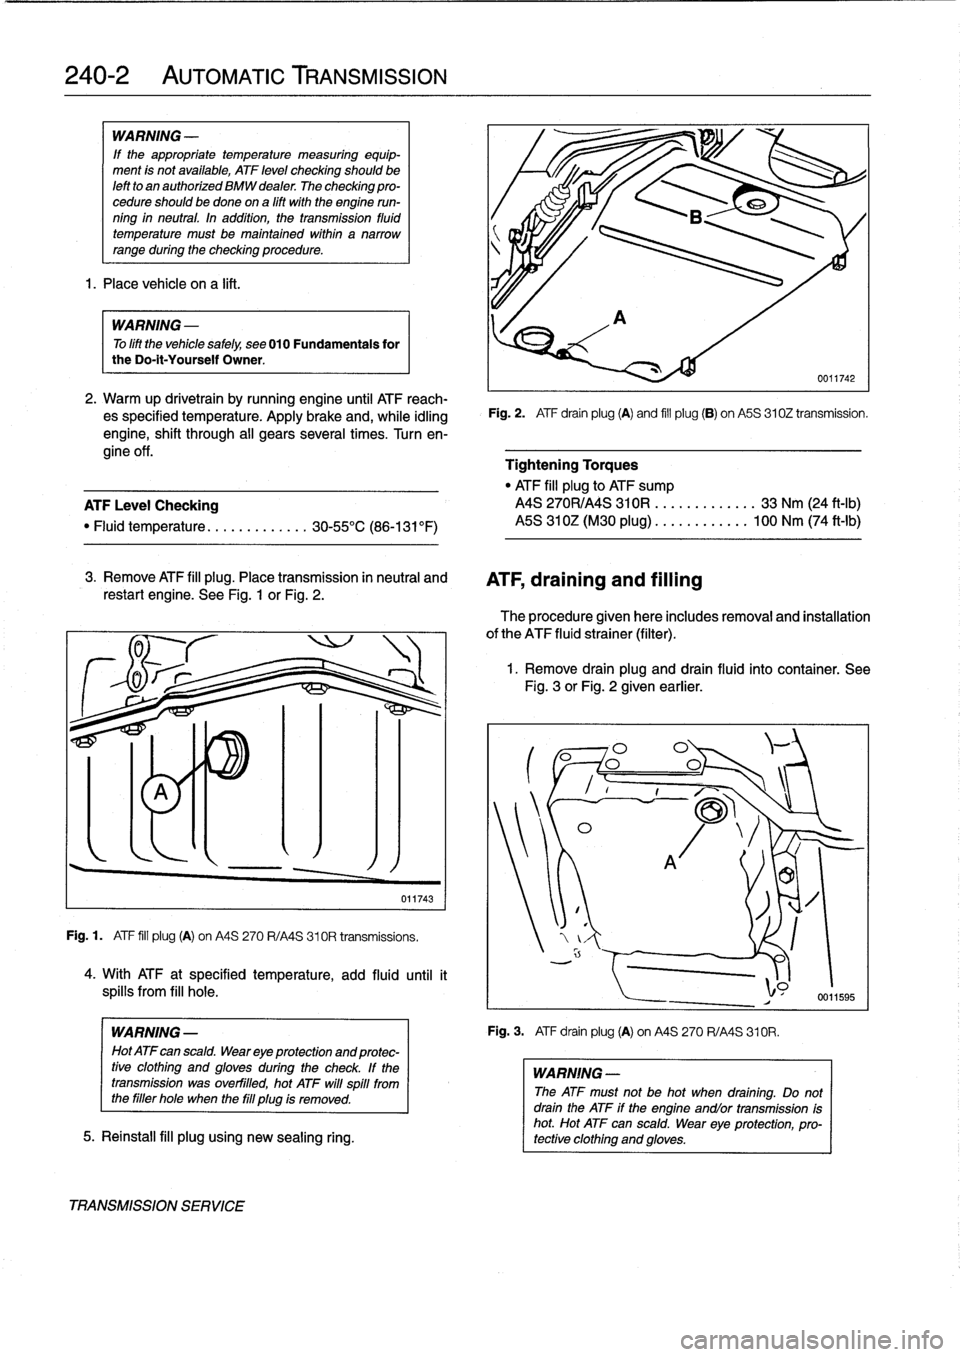 BMW 323i 1995 E36 Owners Manual 
240-2

	

AUTOMATIC
TRANSMISSION

WARNING
-

If
the
appropriate
temperature
measuring
equip-
ment
is
not
available,
ATF
leve¡
checking
shouldbe
left
to
an
authorized
BMW
dealer
The
checking
pro-
ced